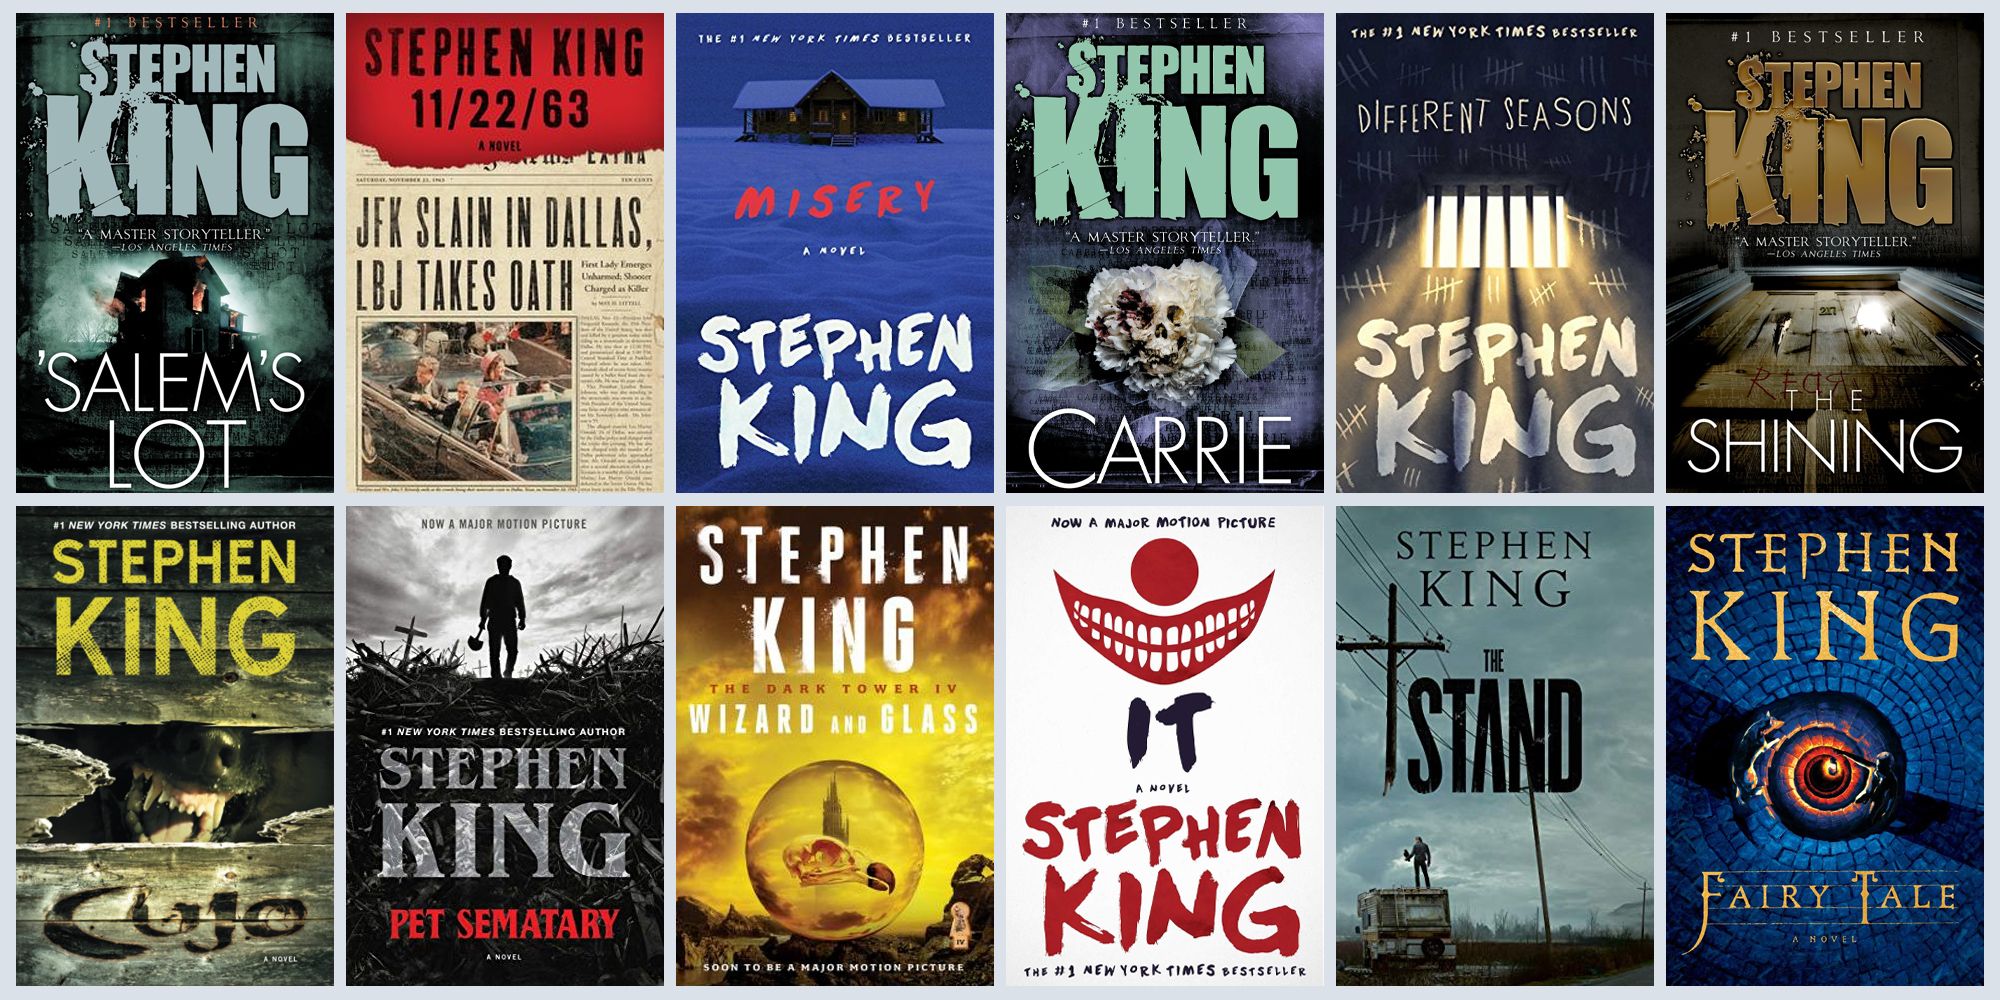 Stephen King Books Exposed: Uncovering the Master's Literary Secrets